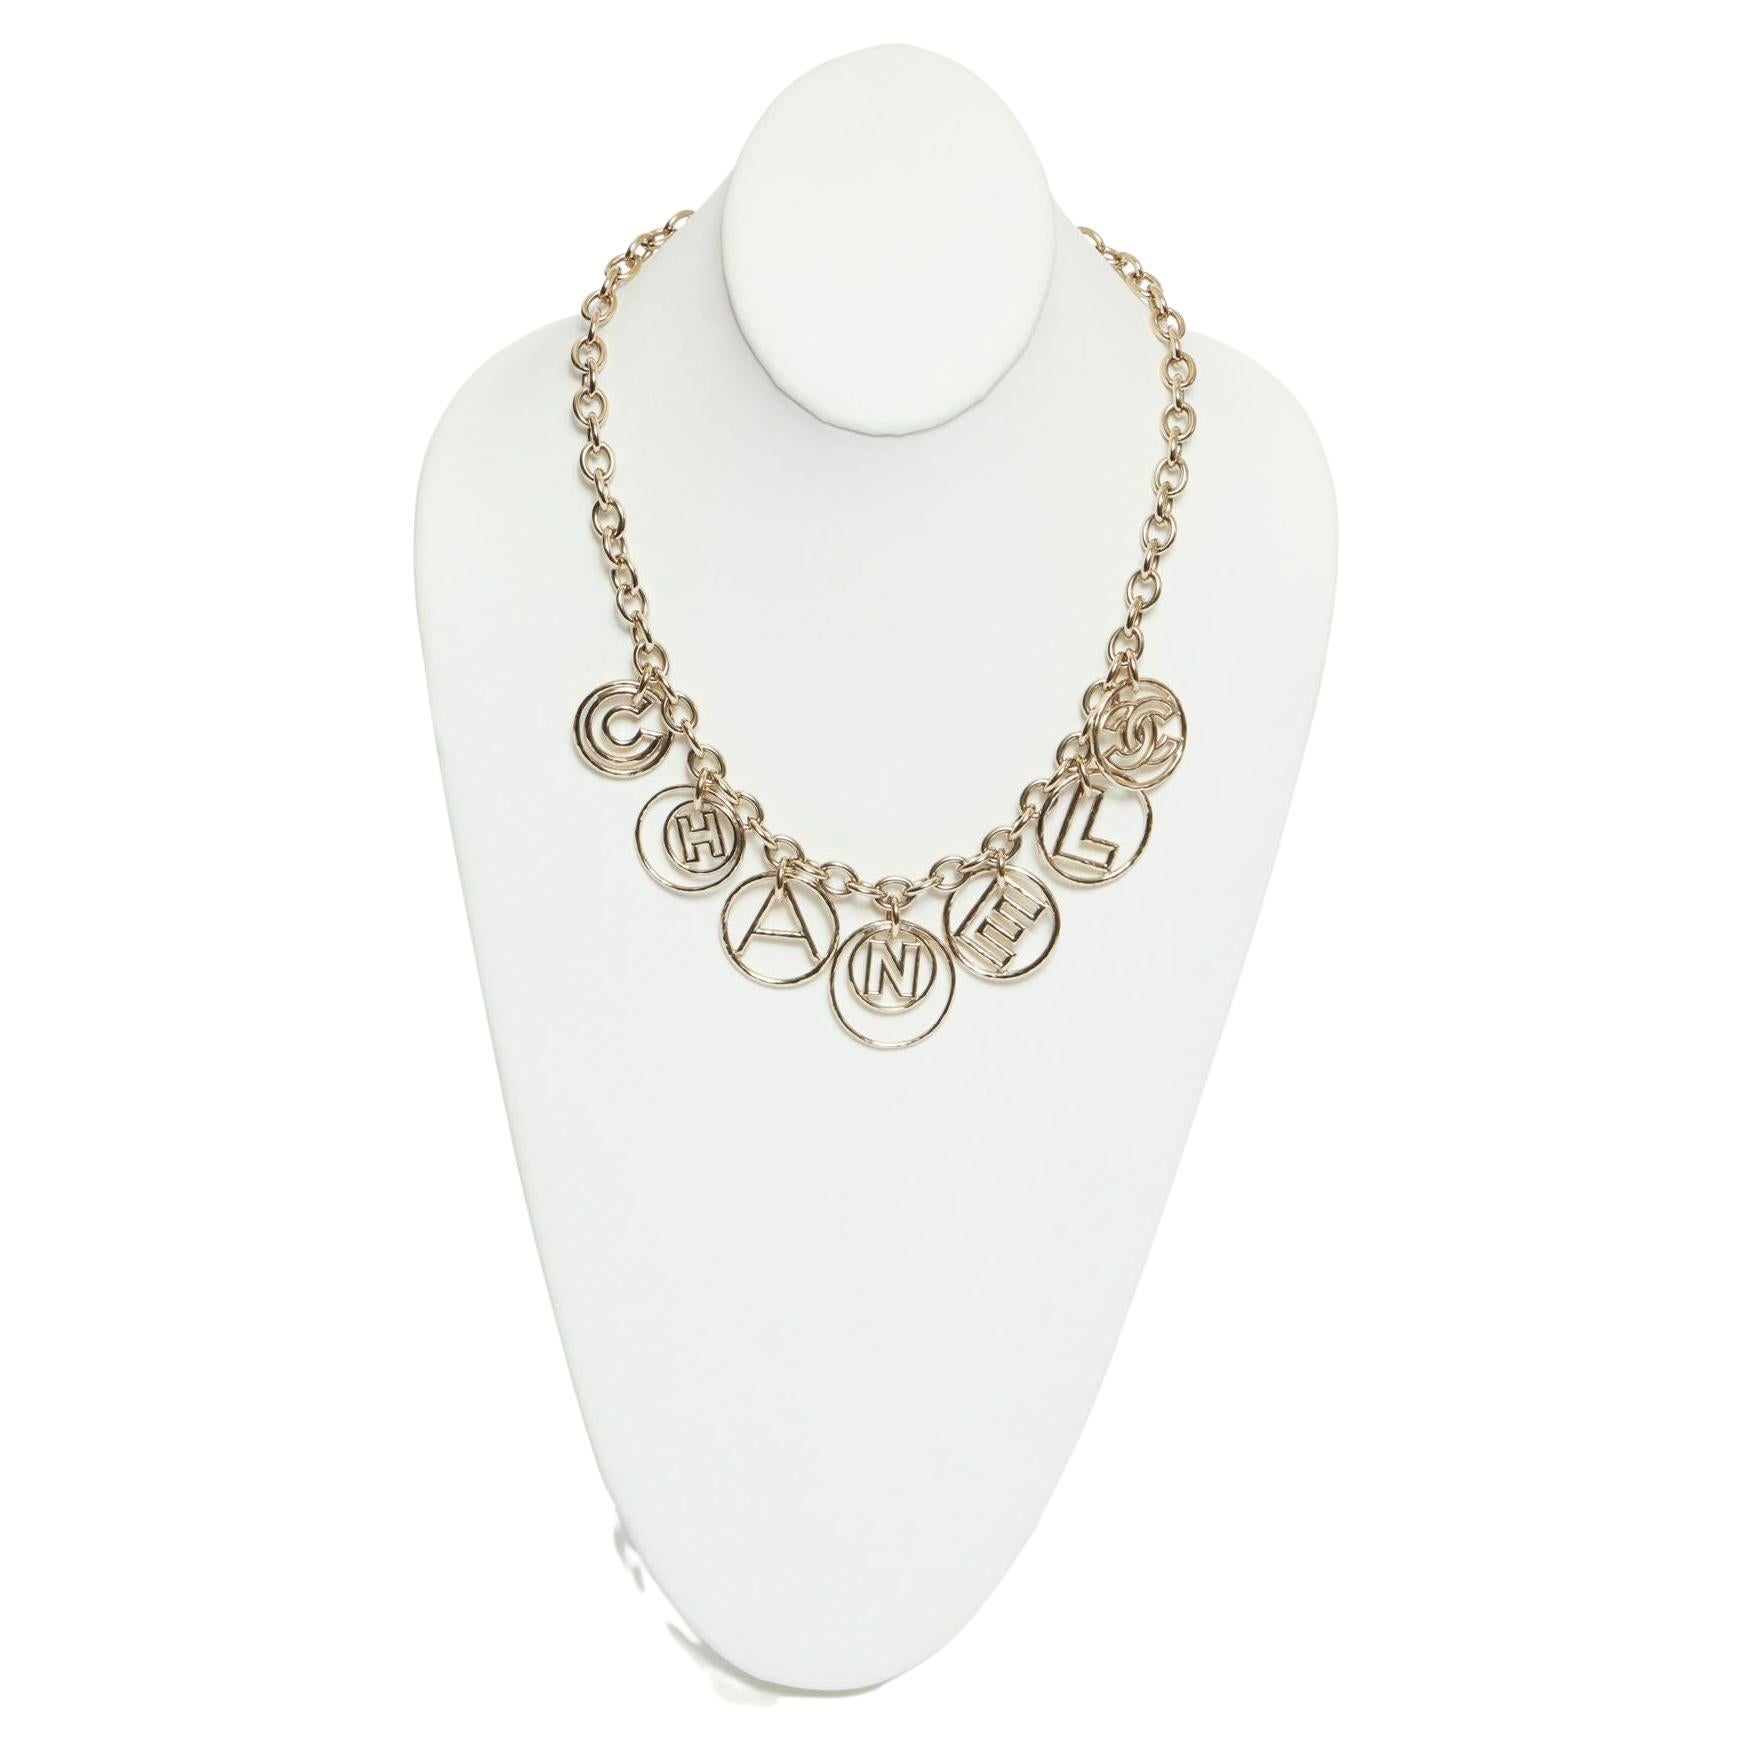 Chanel Champagne Gold Charm Necklace